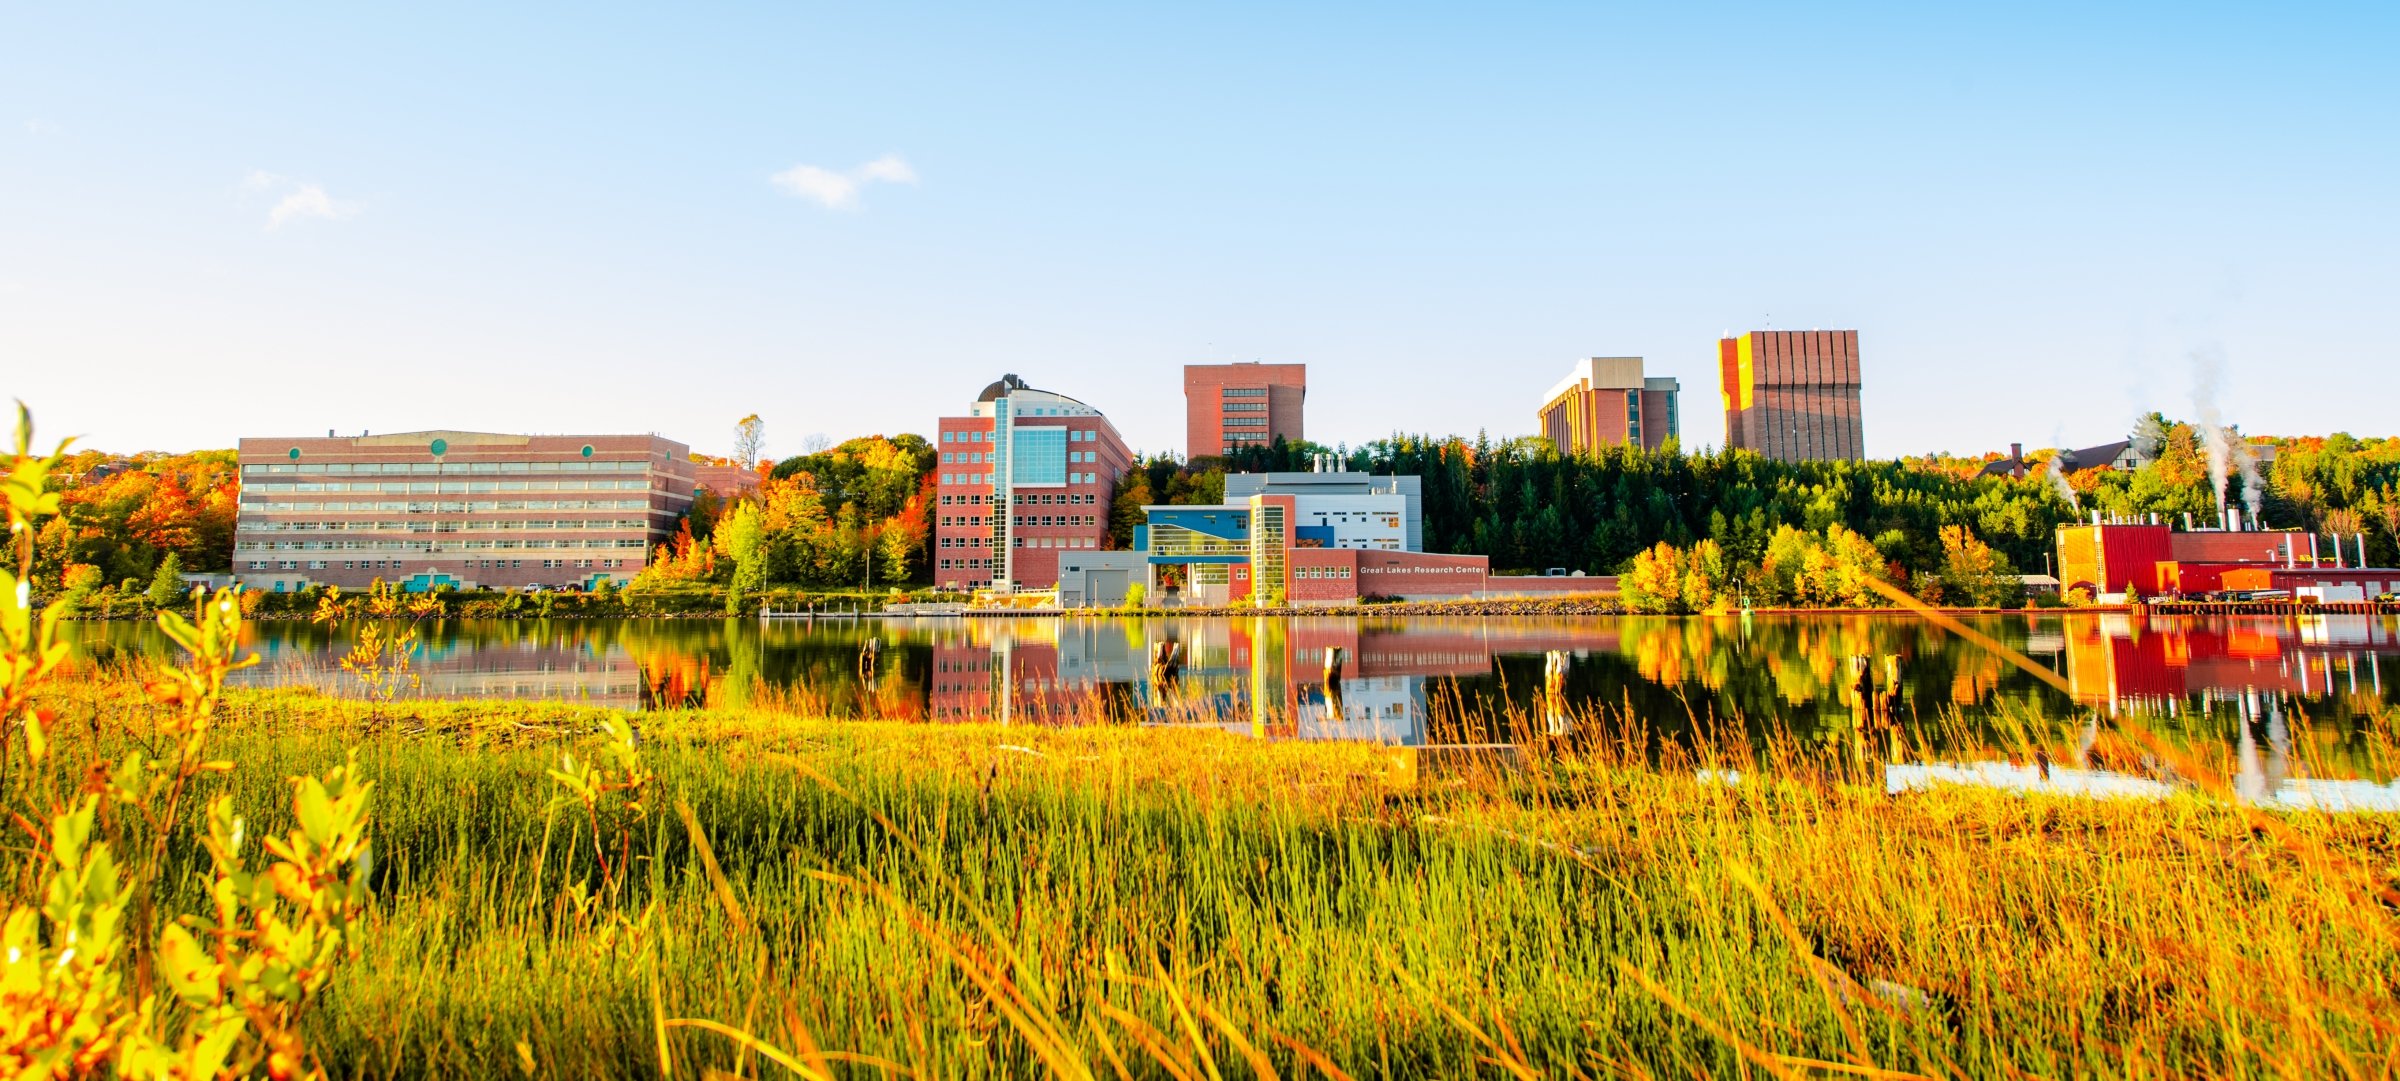 A view of campus from across the waterway in the fall.